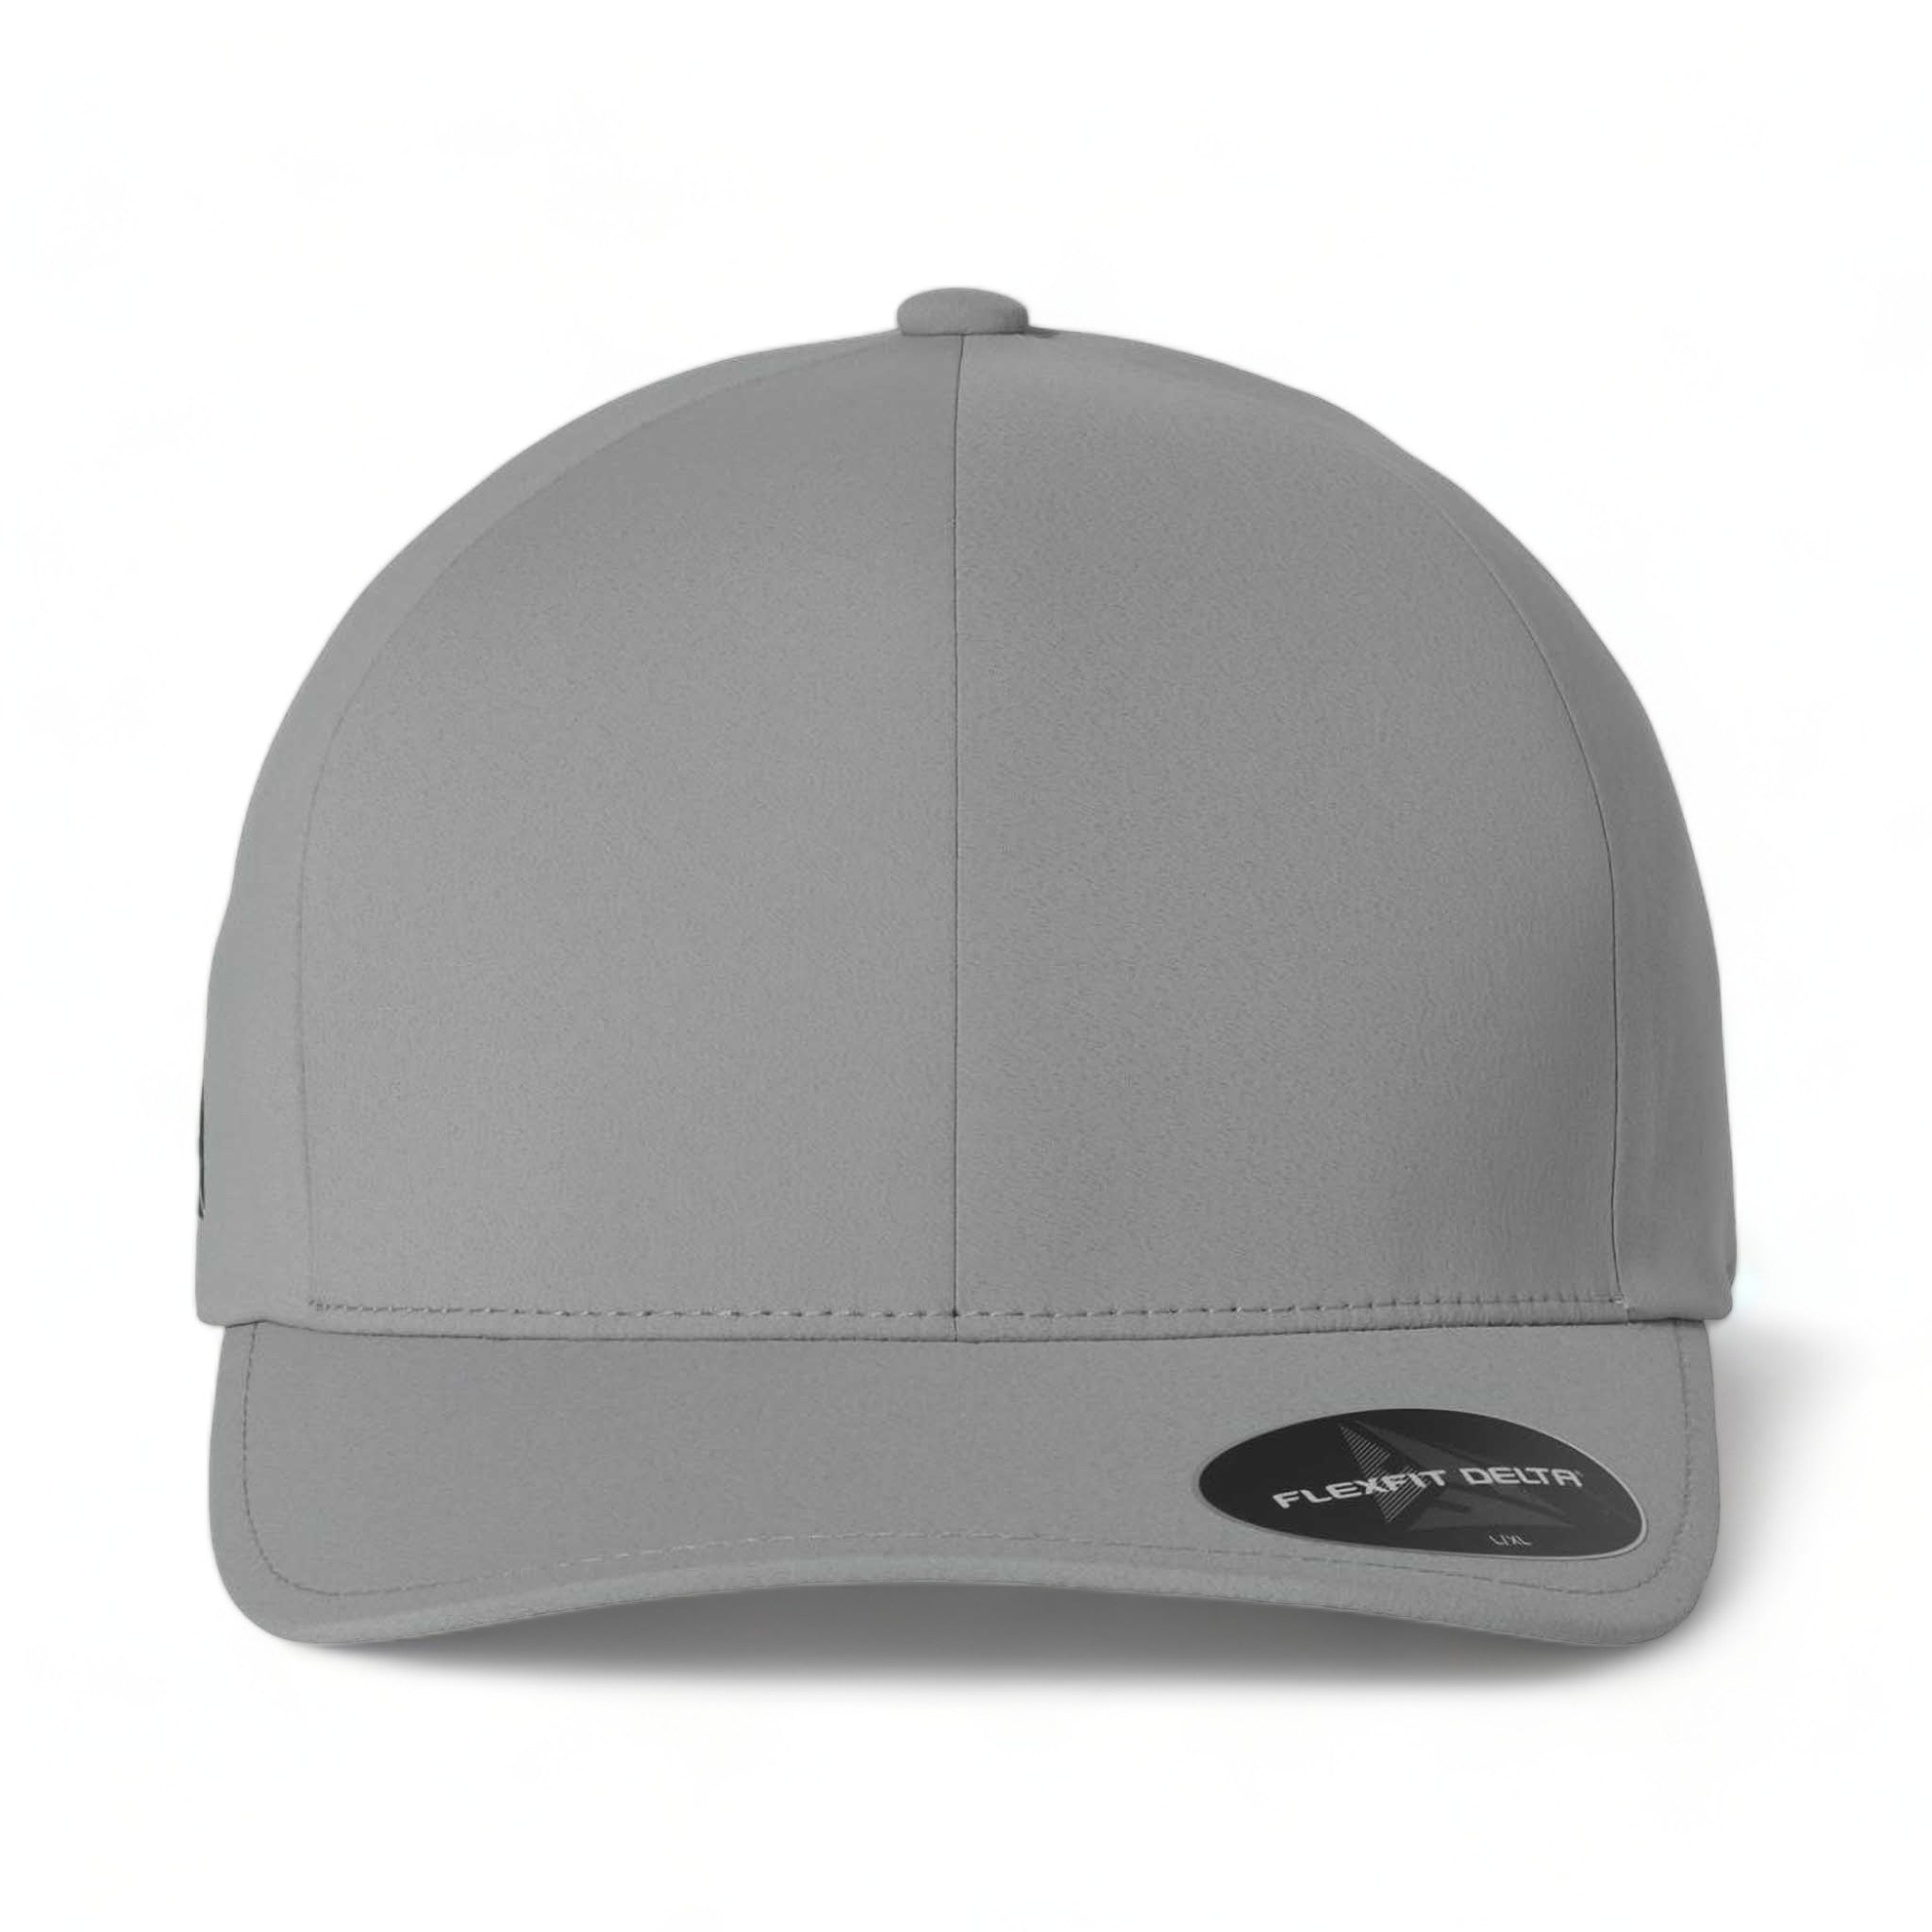 Front view of Flexfit 180 custom hat in silver